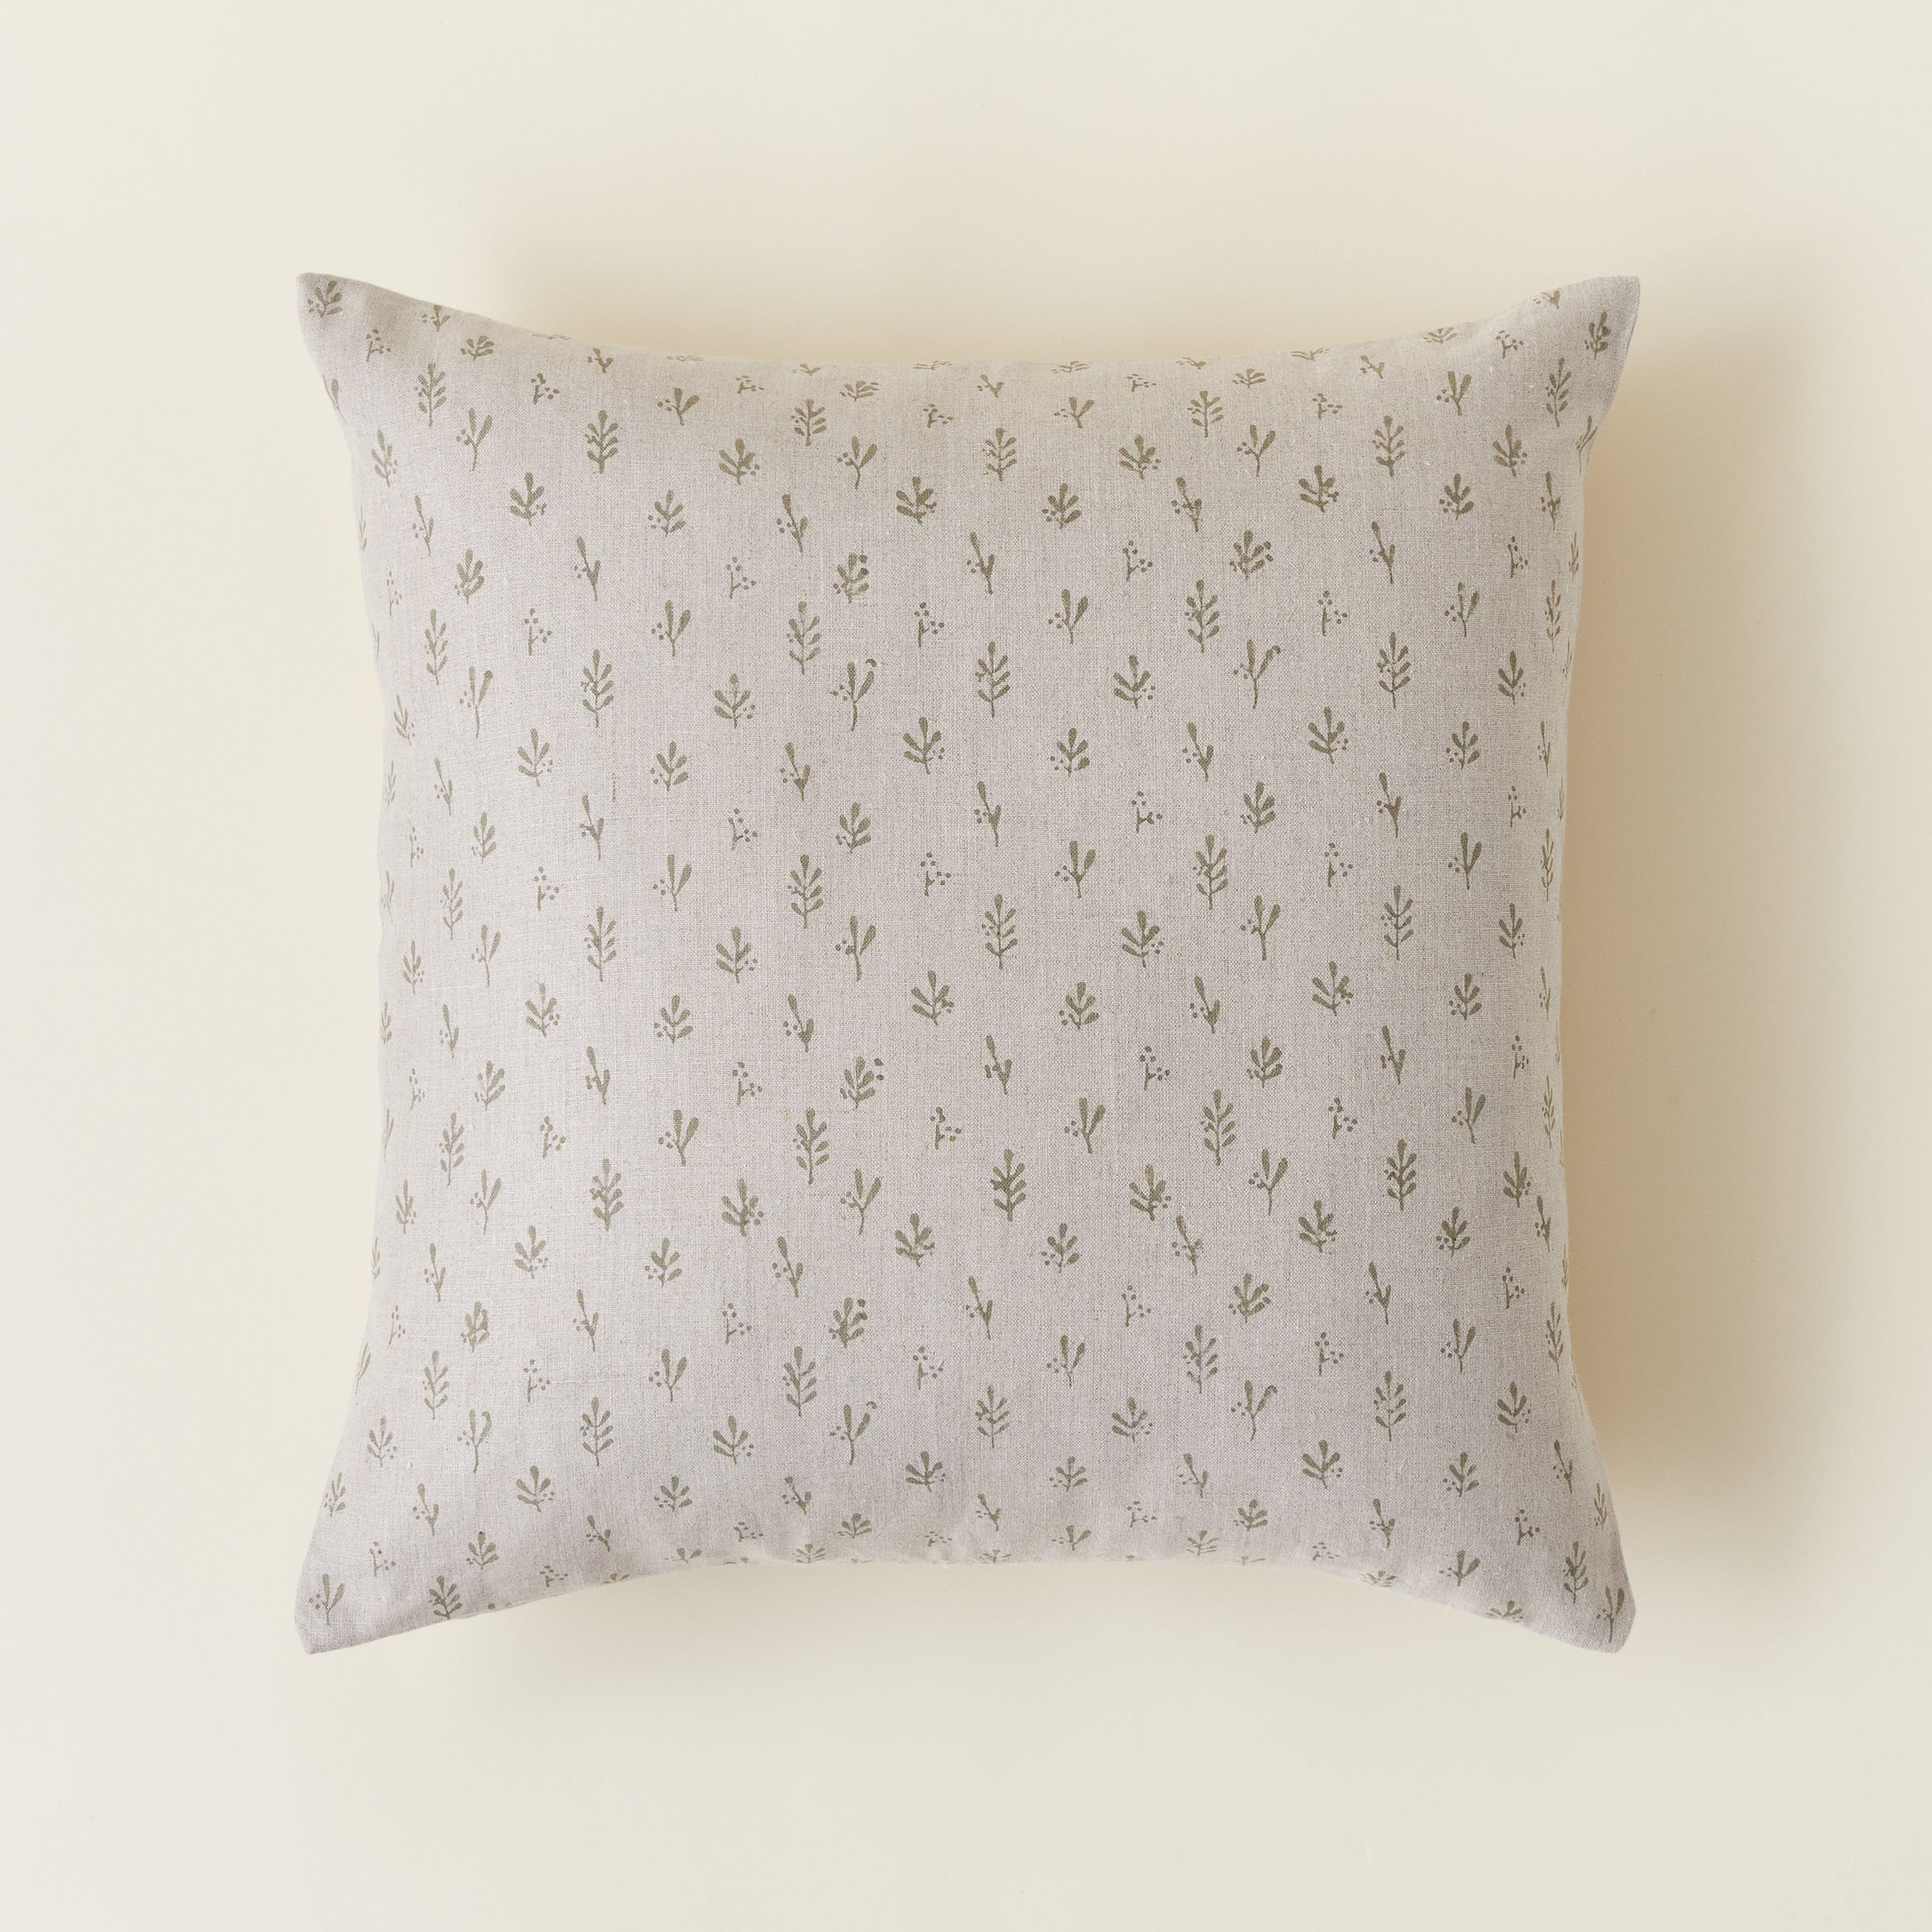 KMH x Ginger Sparrow - Floral Pillow Cover 2